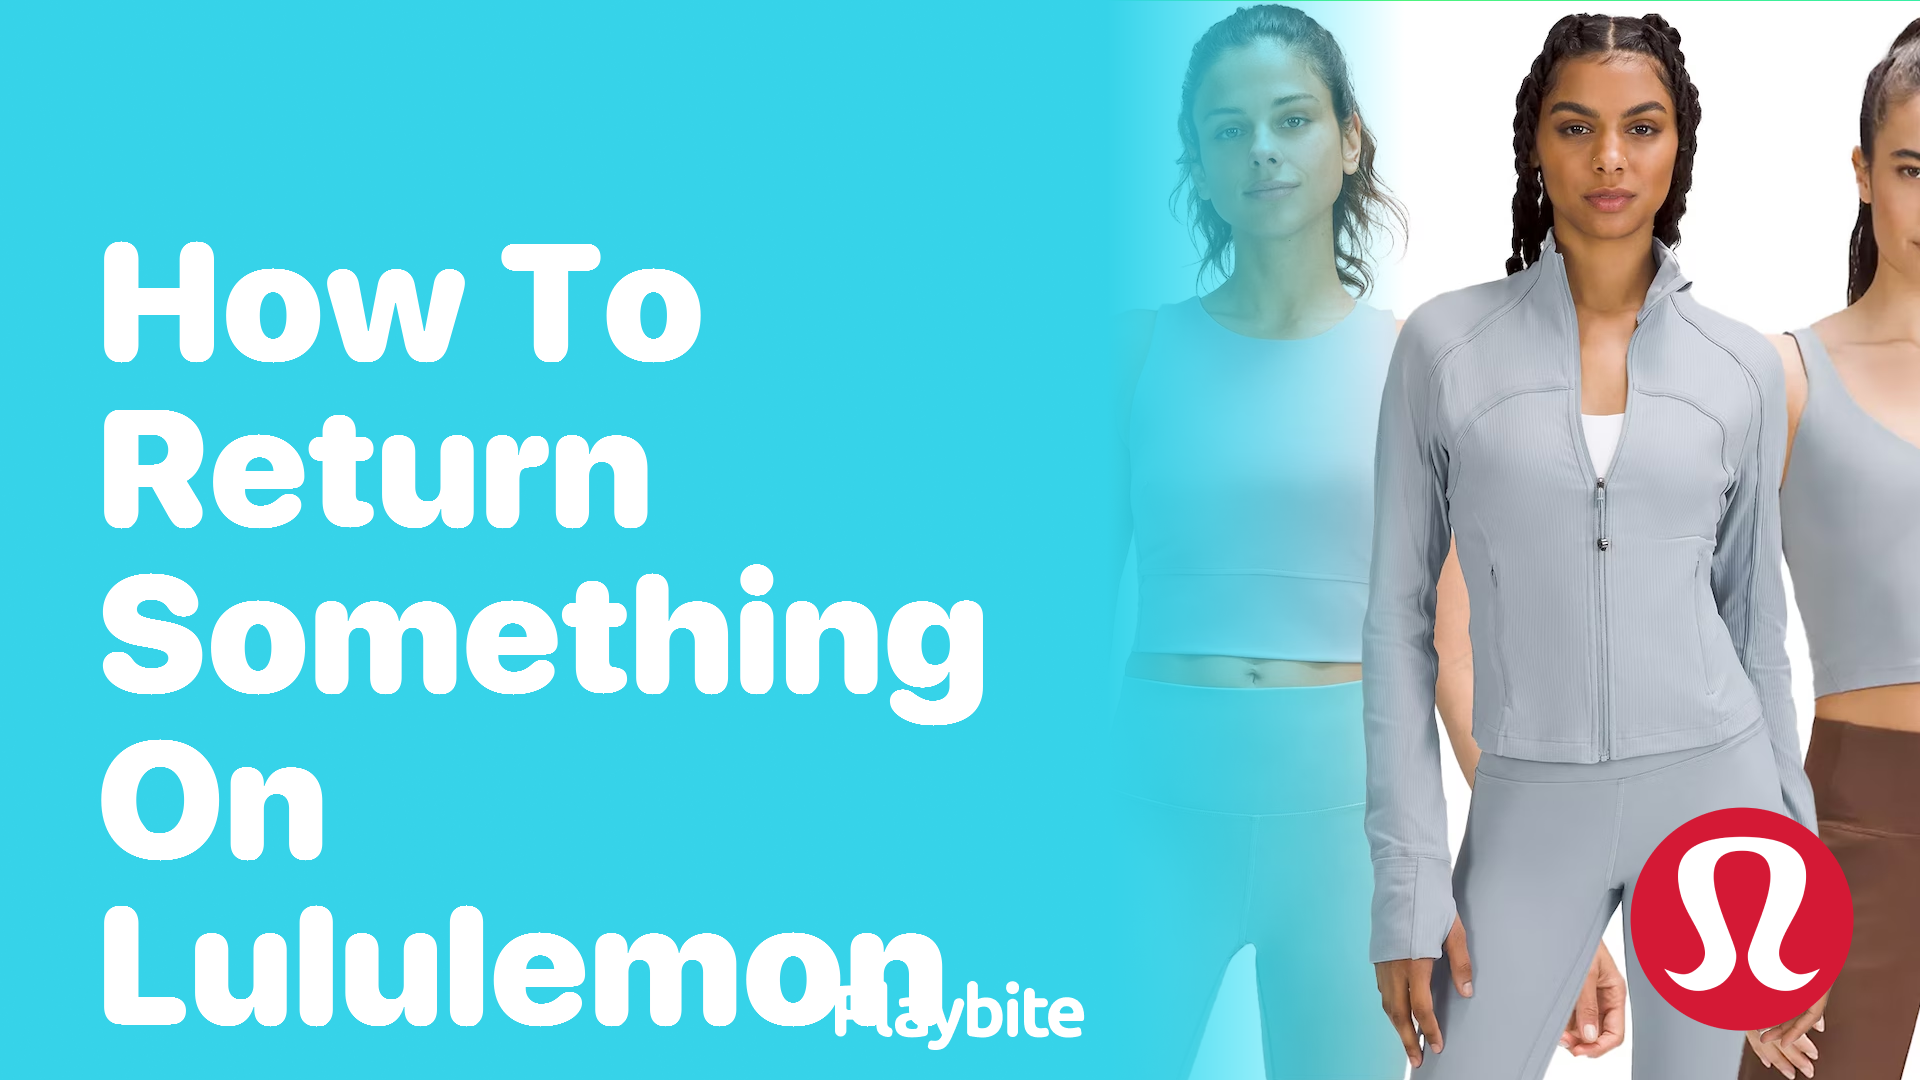 How to Return Something on Lululemon: A Quick Guide - Playbite